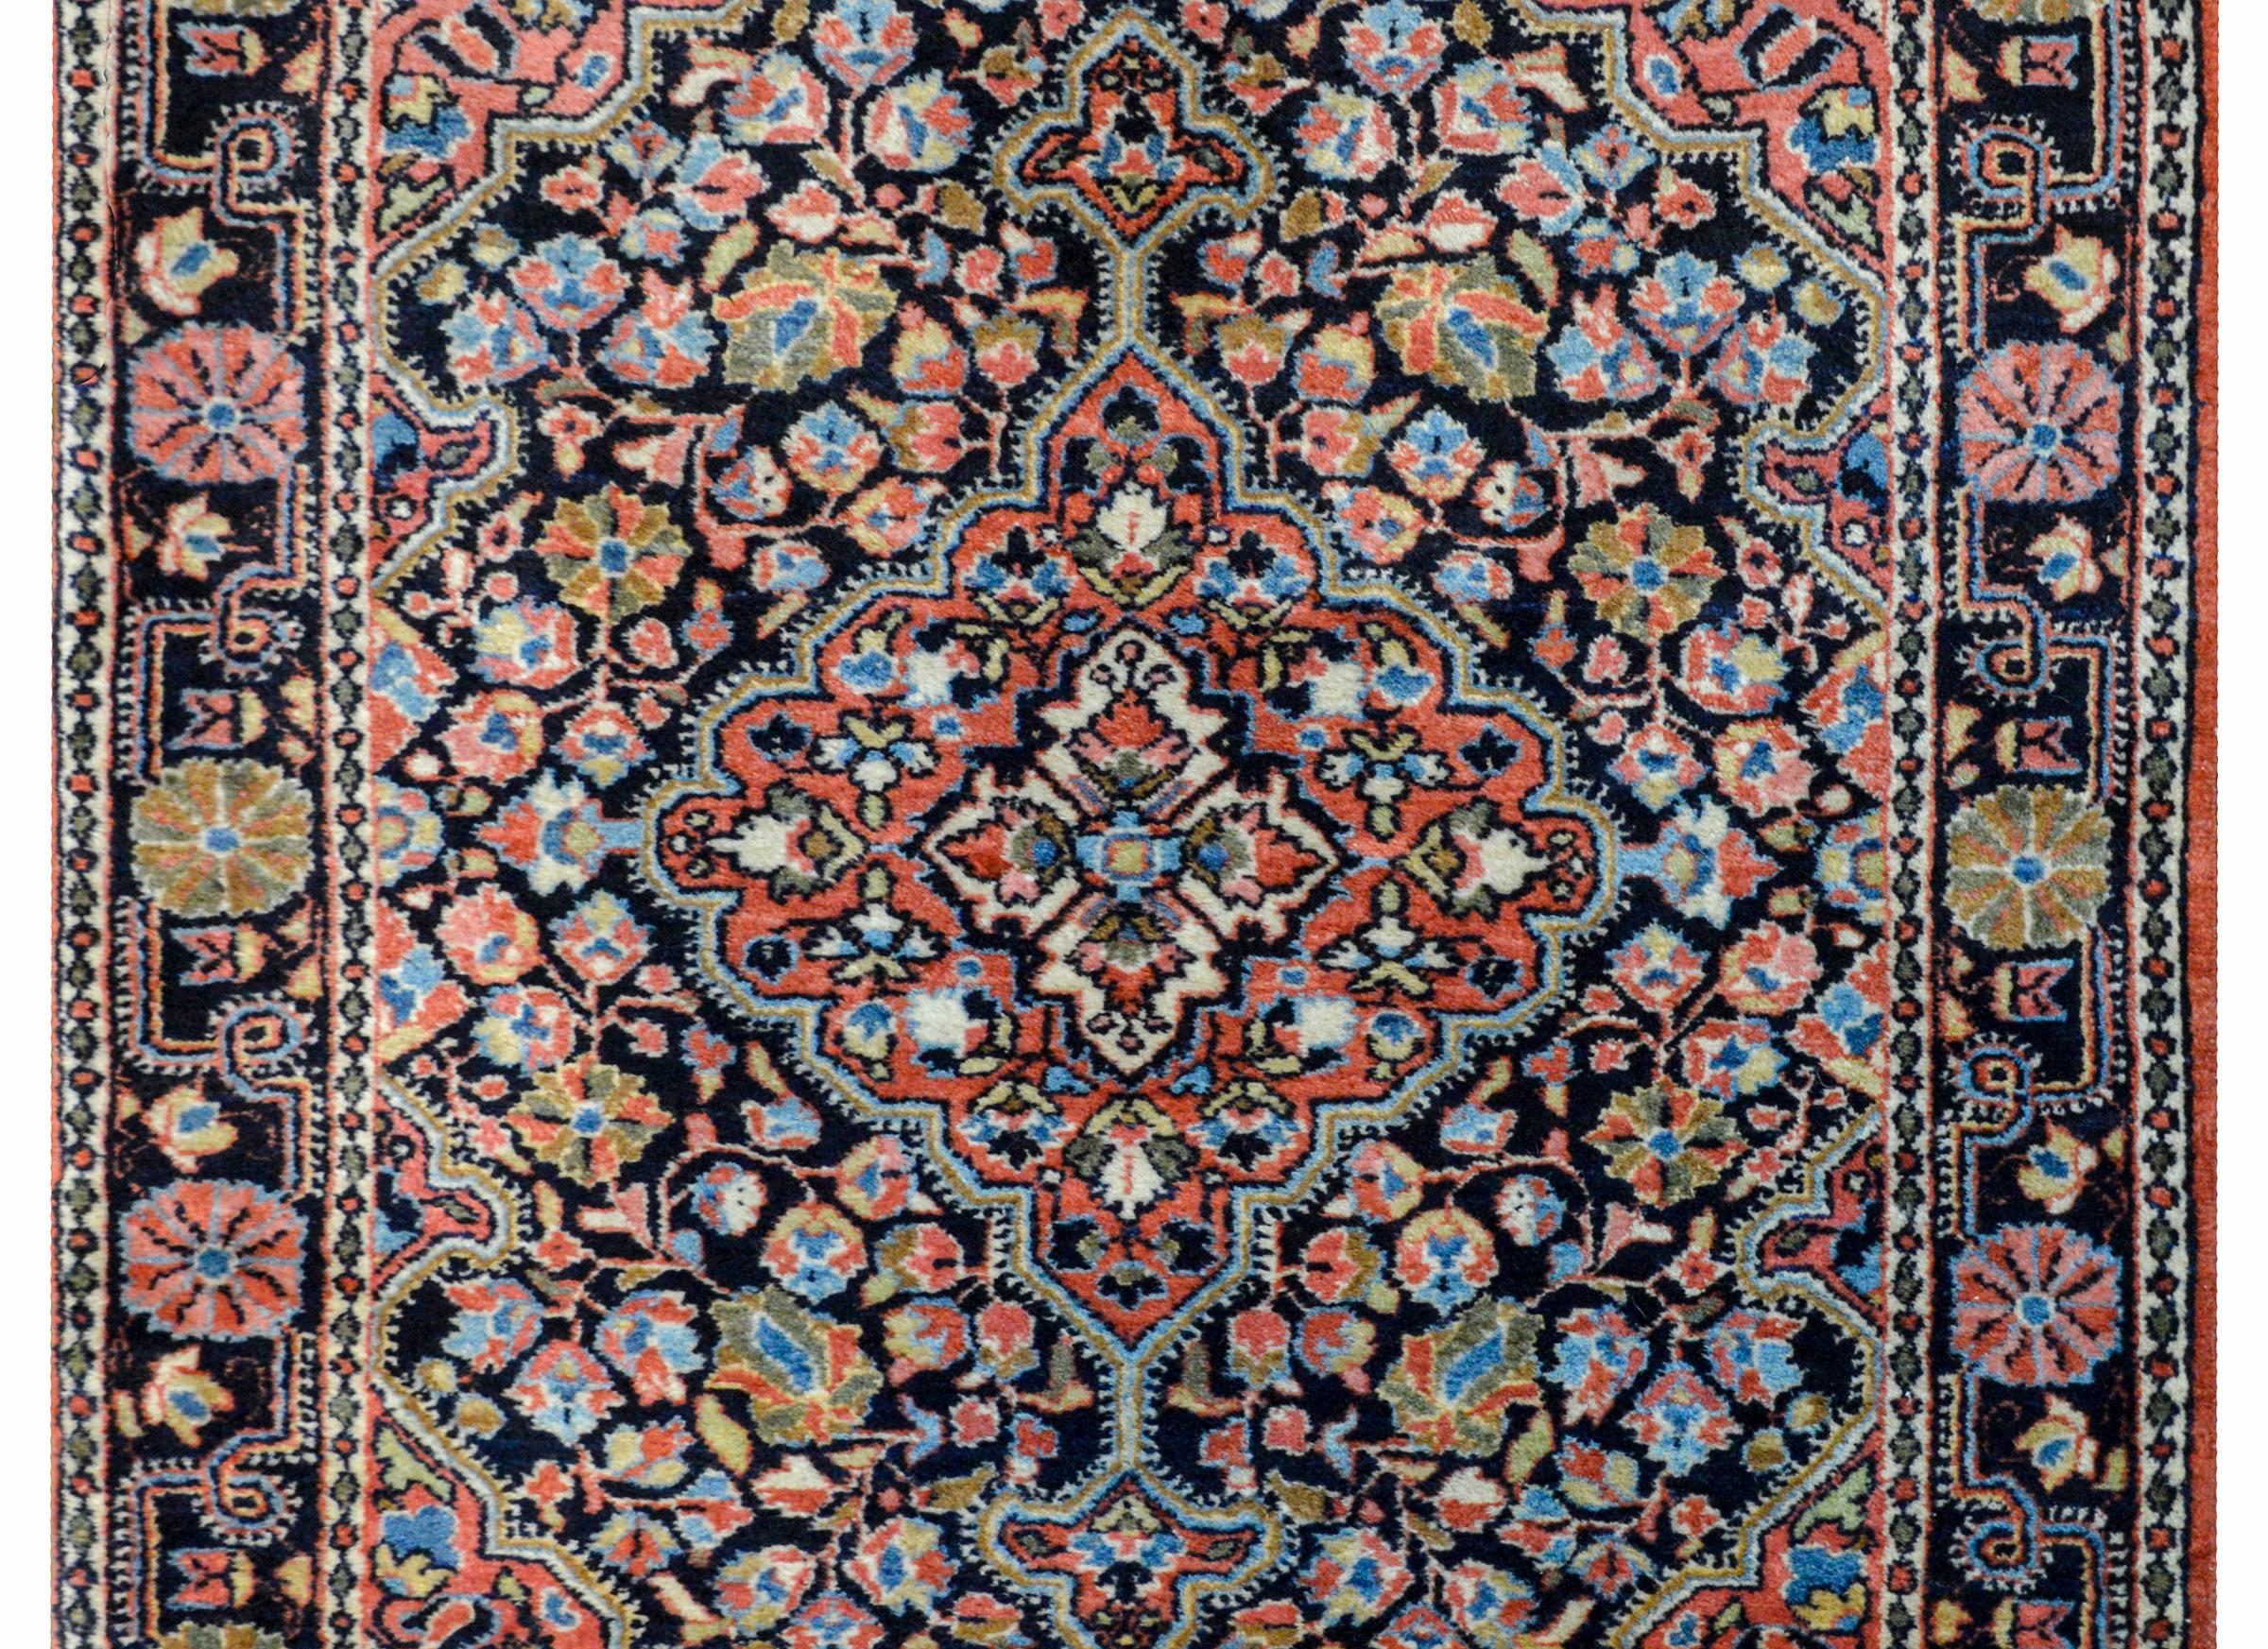 A beautiful early 20th century Persian Sarouk rug with a large central floral medallion amidst a field of flowers and scrolling vines woven in myriad colors including crimson, green, gold, white, and light and dark indigo, all on a black background,